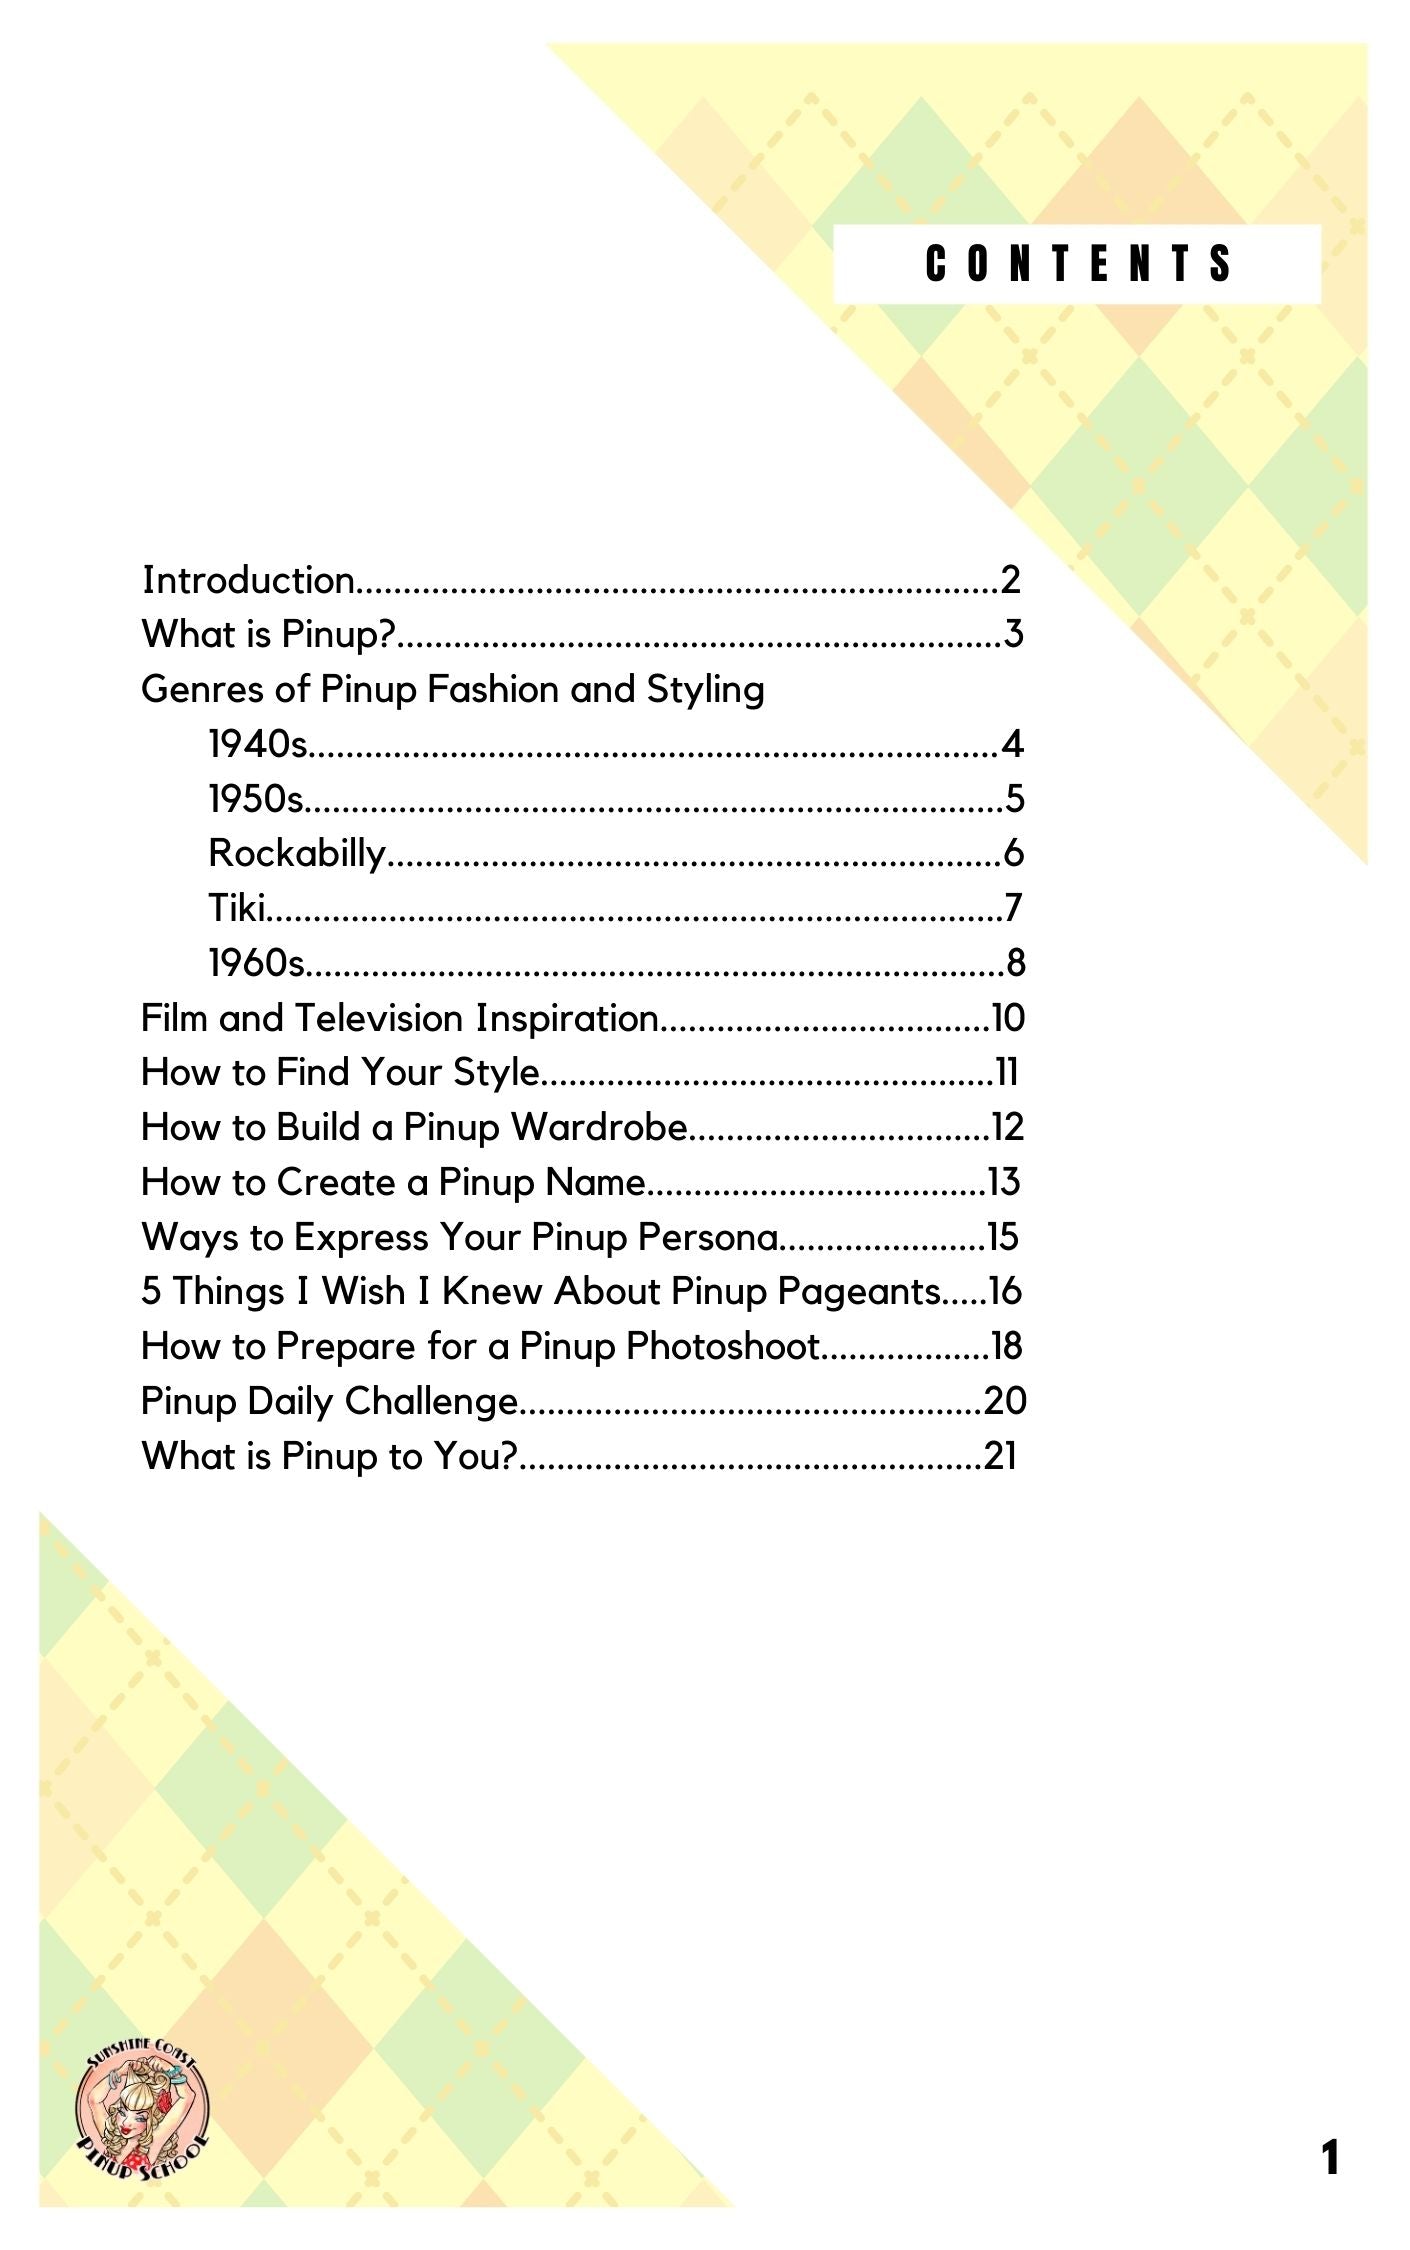 Beginners guide to pinup e-book contents page